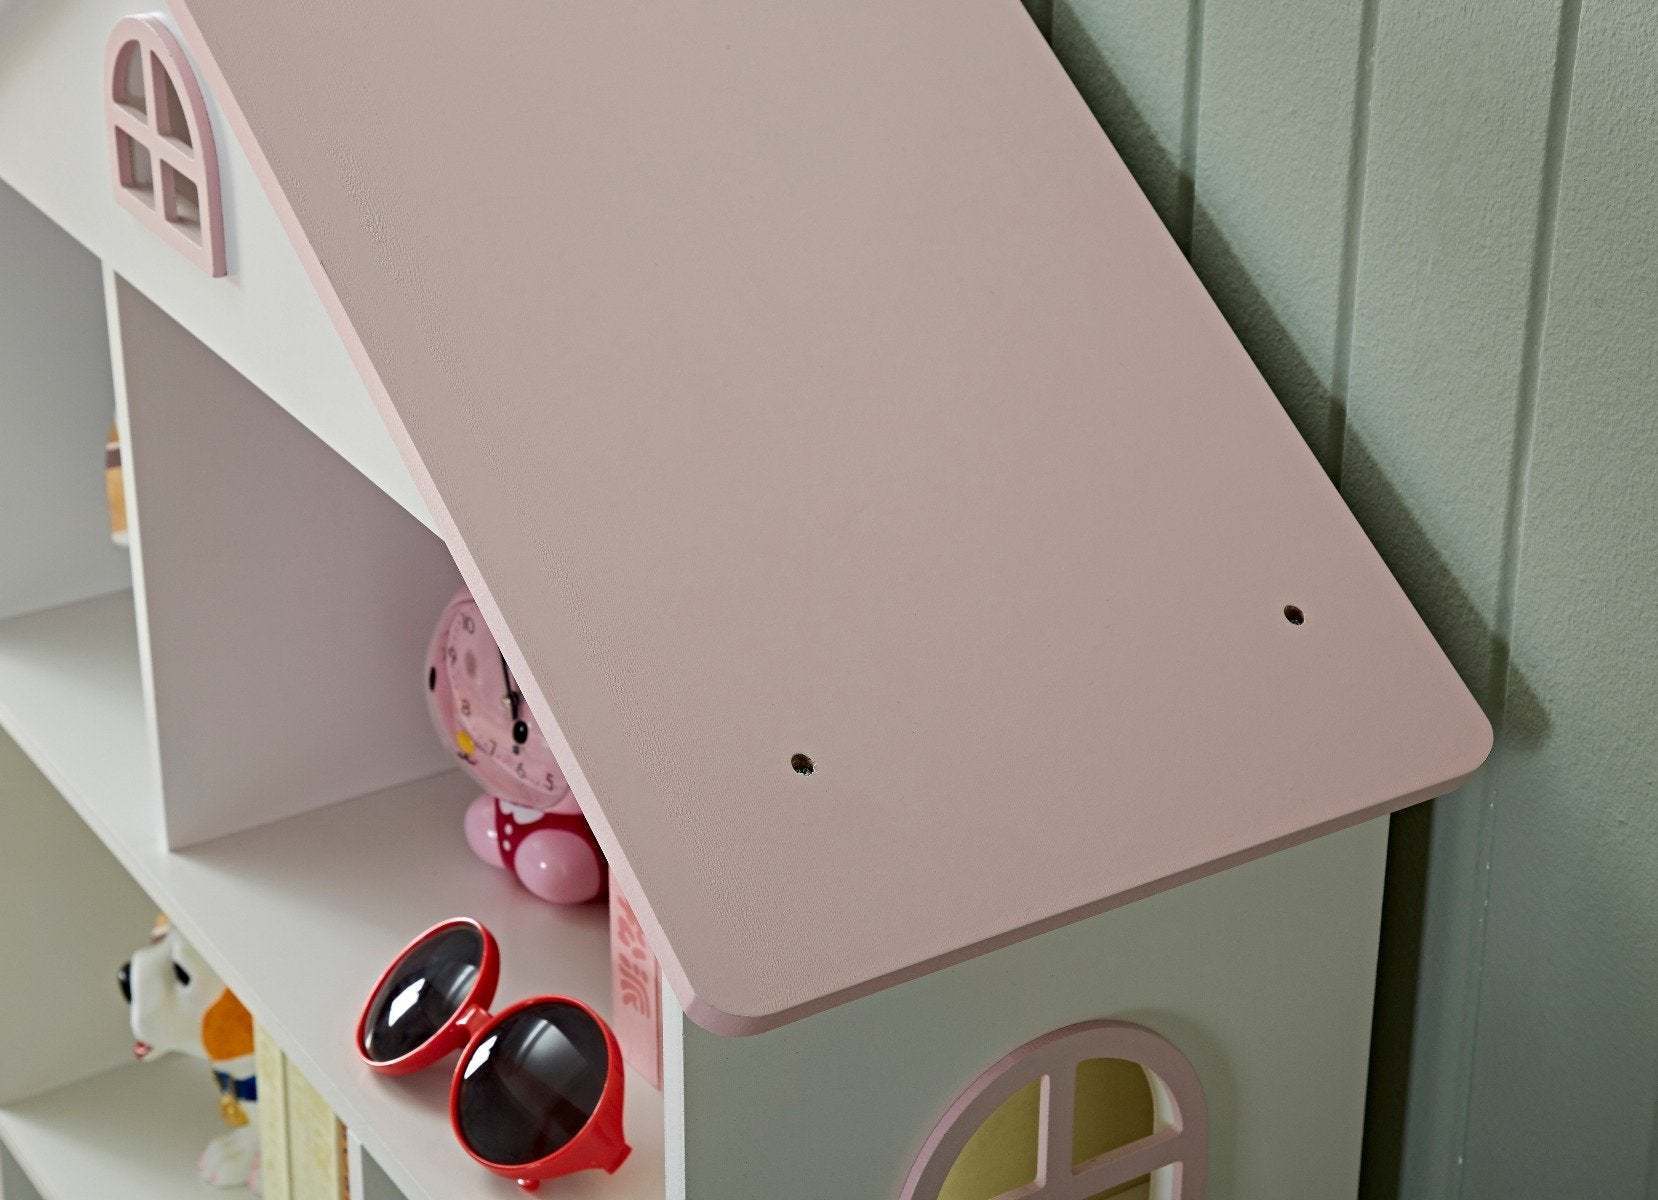 Kids Funnel Veronica Girls Pink Roof Dollhouse Bookcase